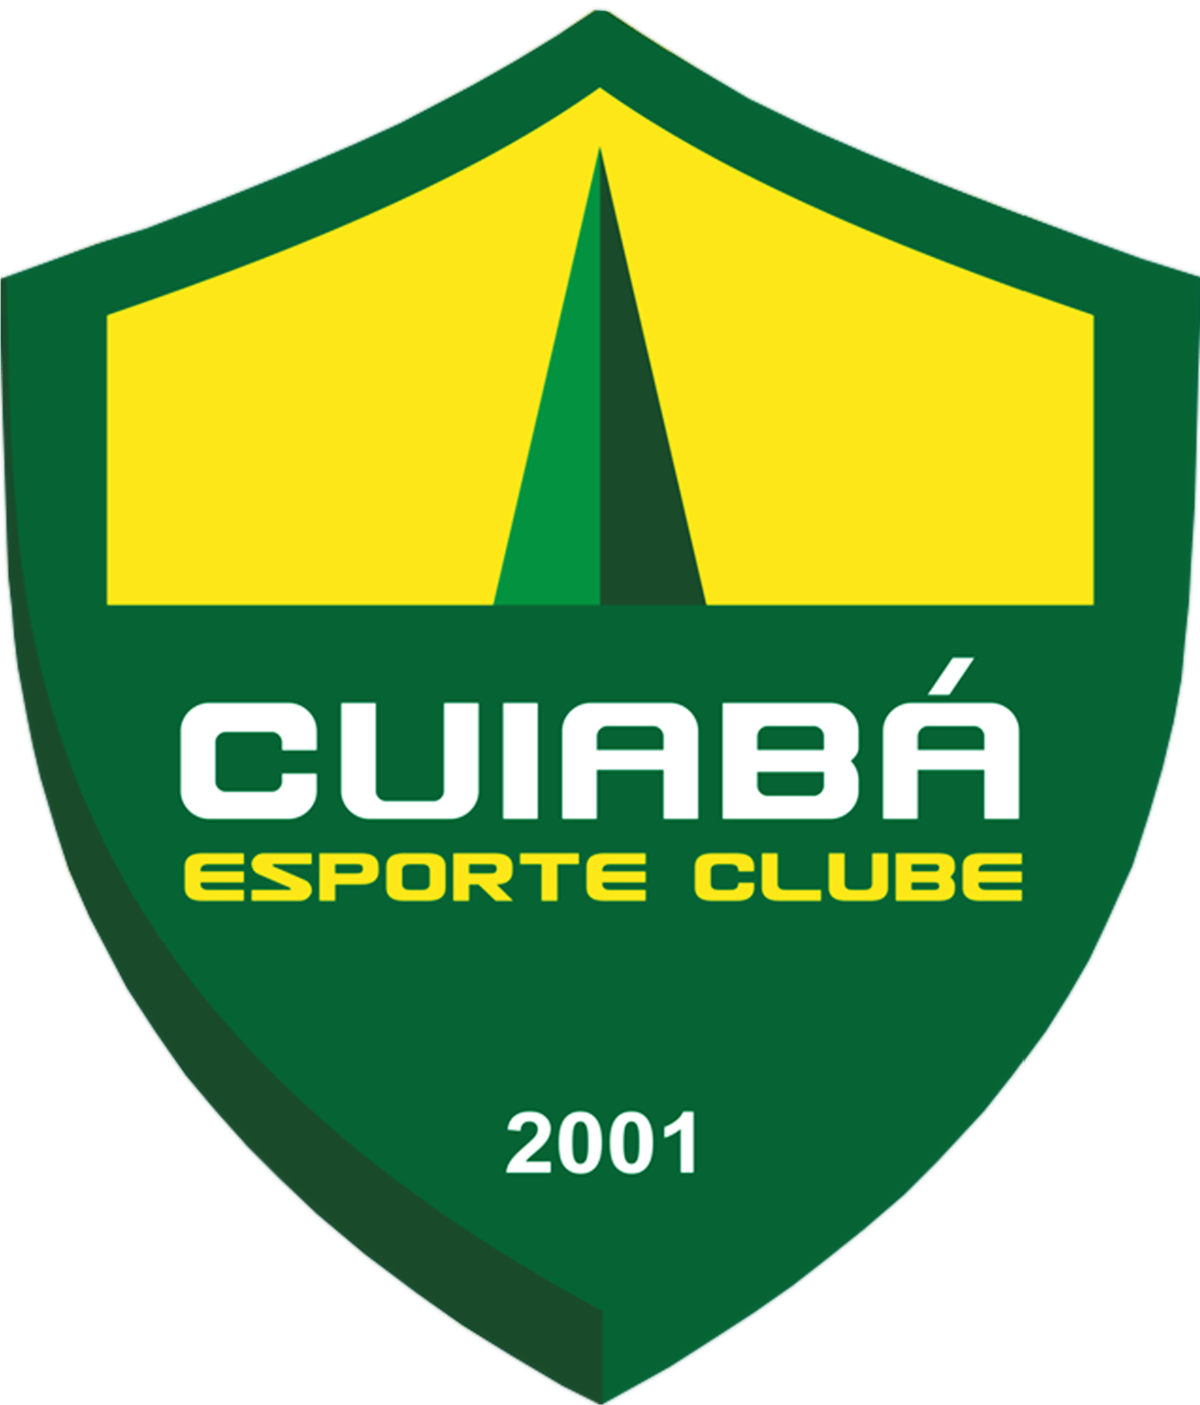 Cuiabá vs Atlético-MG Prediction: The Miners are confident in a victory